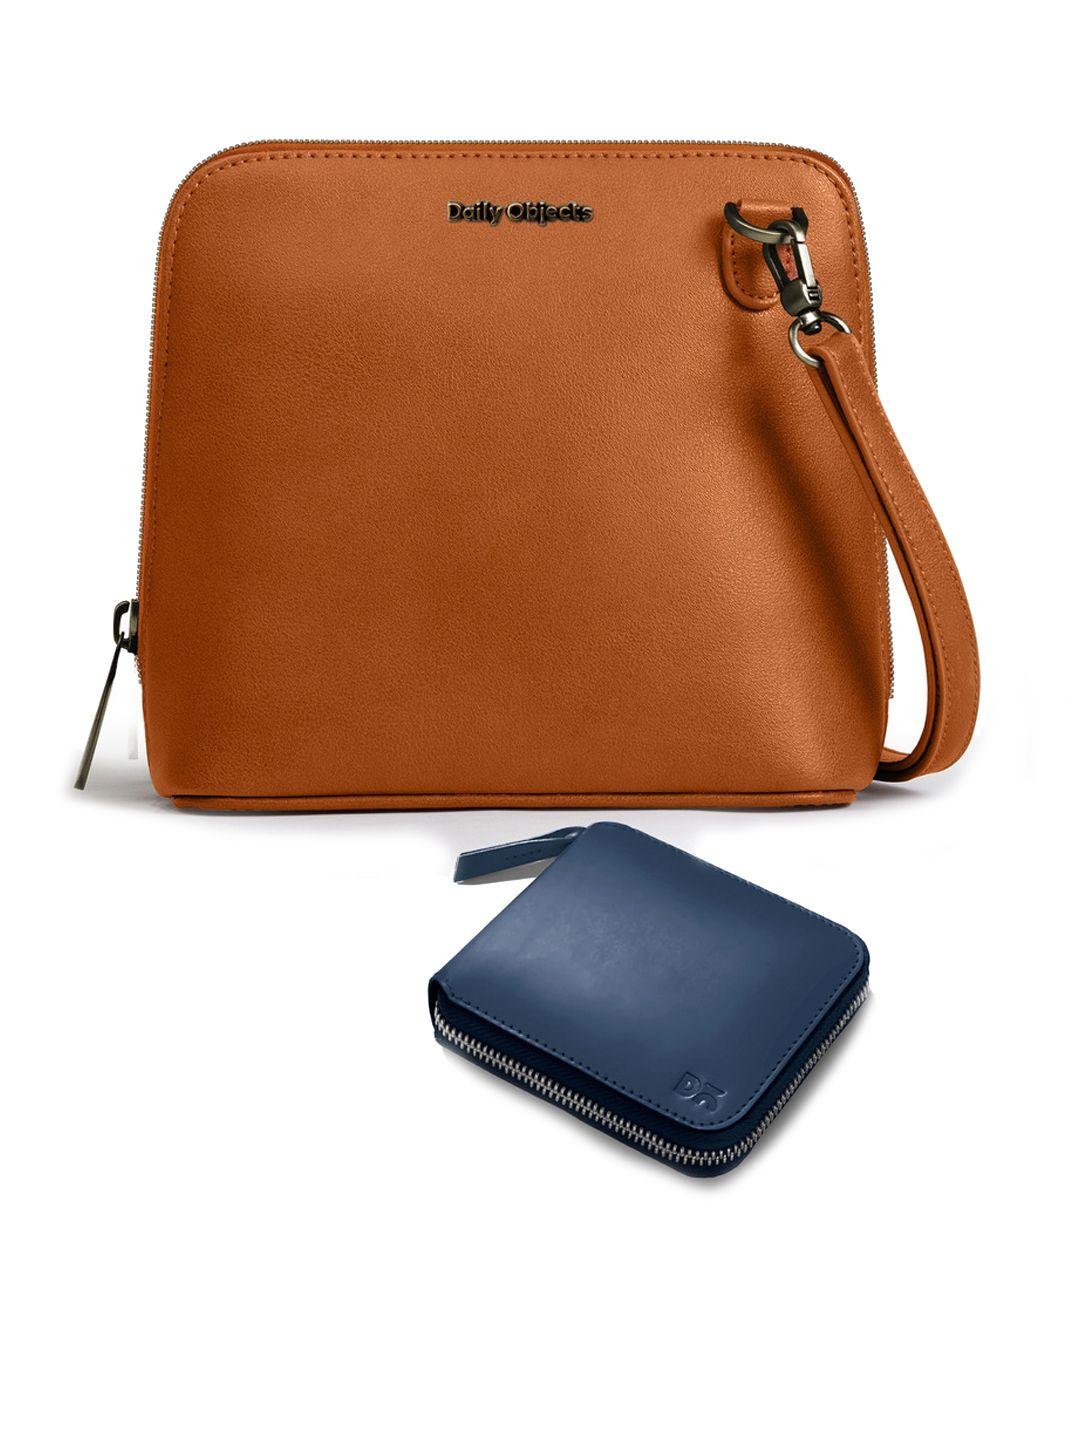 dailyobjects leather structured sling bag with zip wallet